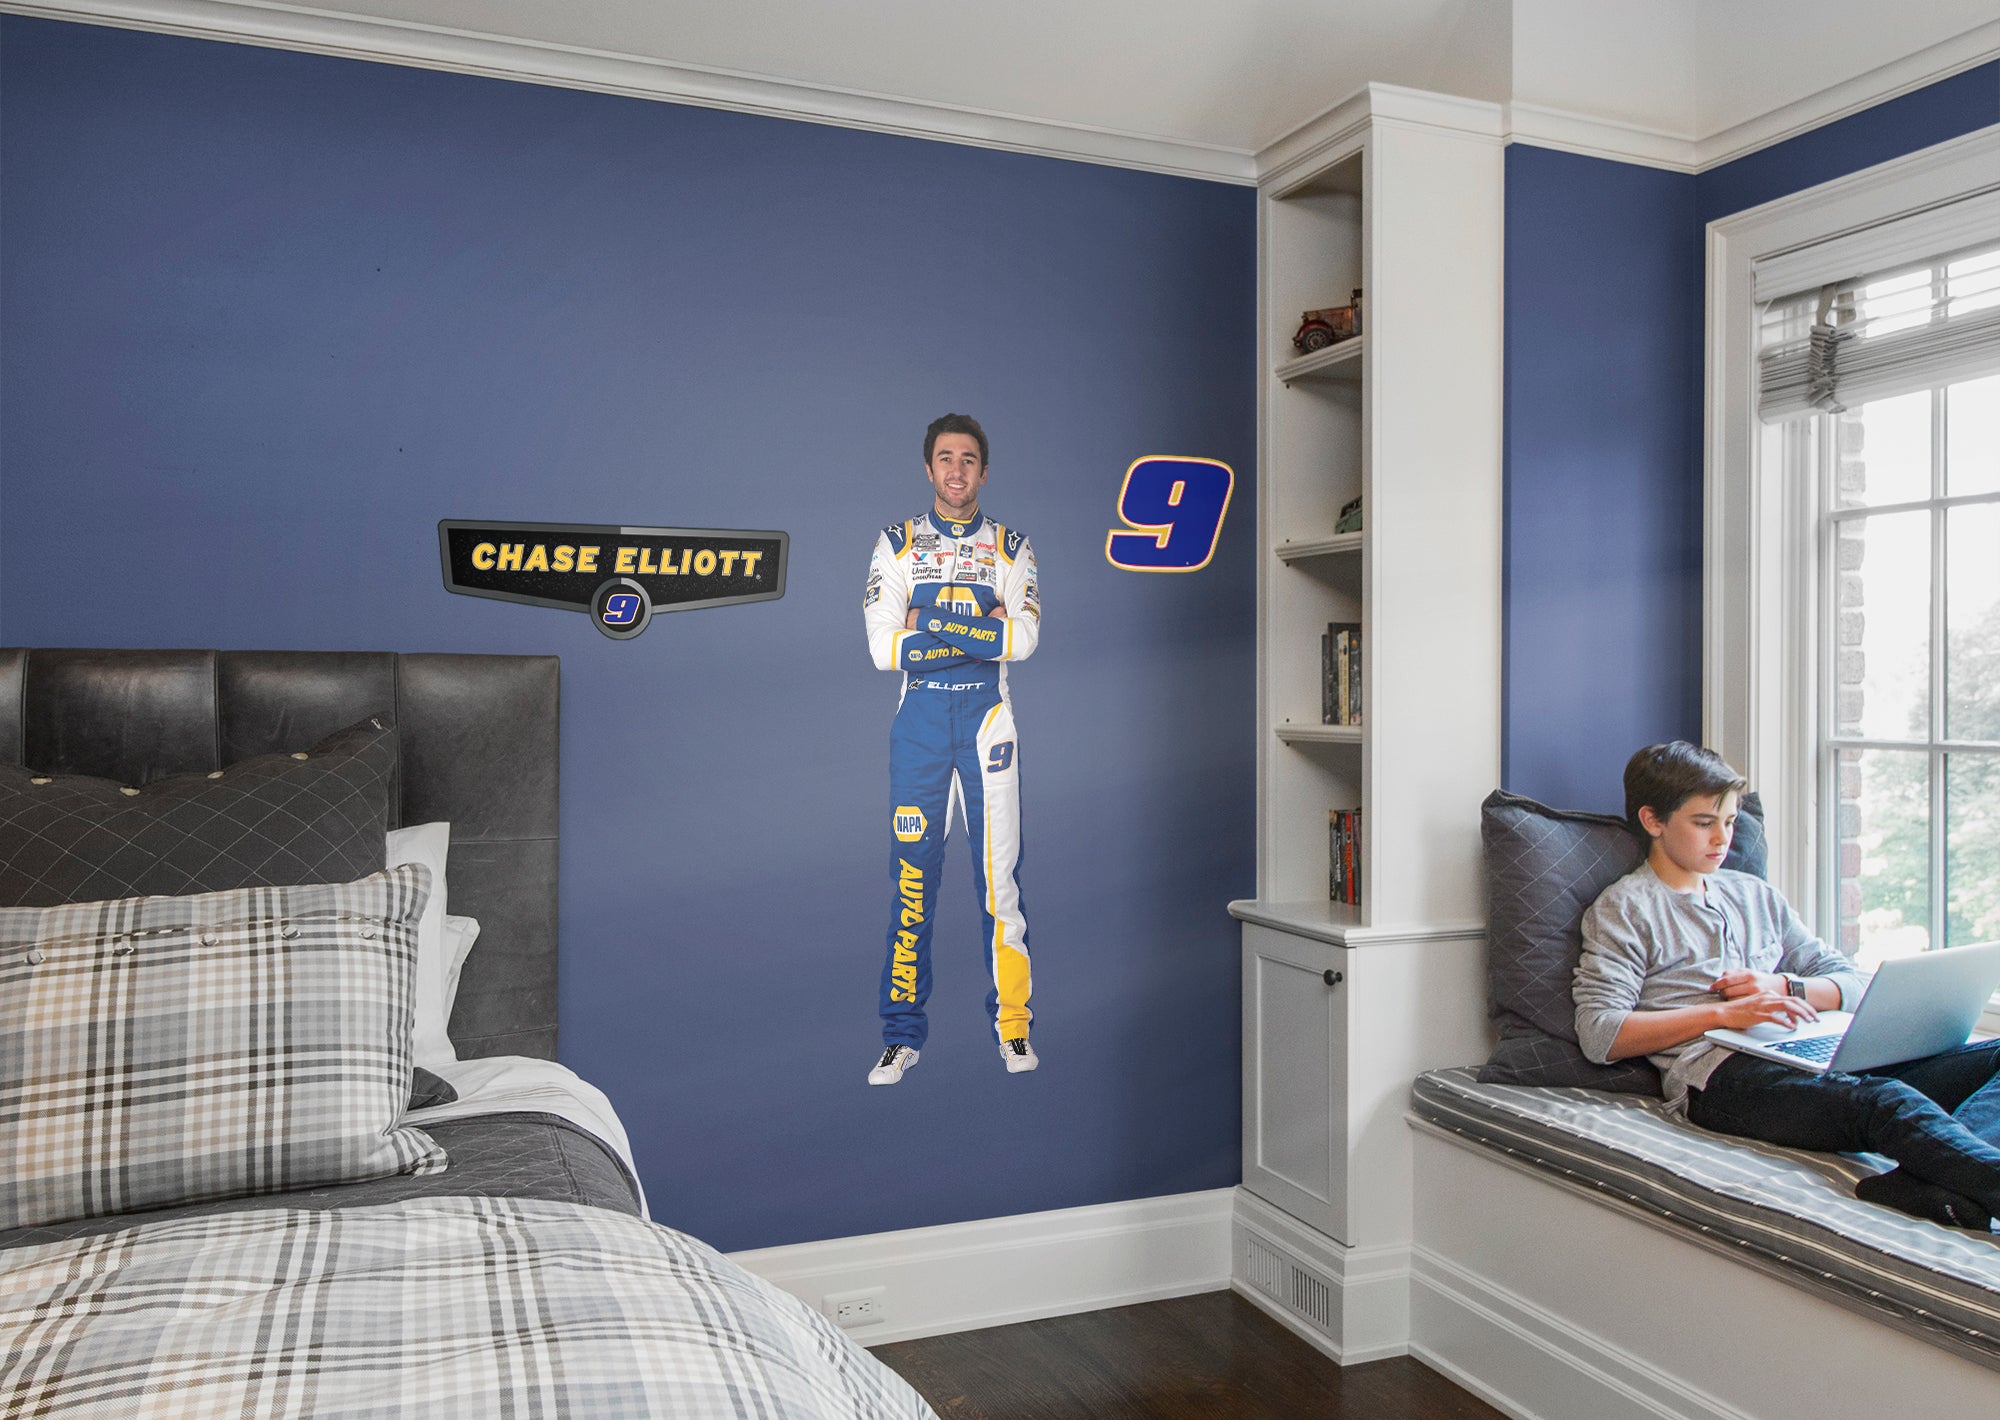 Chase Elliott 2021 Driver - Officially Licensed NASCAR Removable Wall Decal Giant Character + 2 Decals (51"W x 15"H) by Fathead